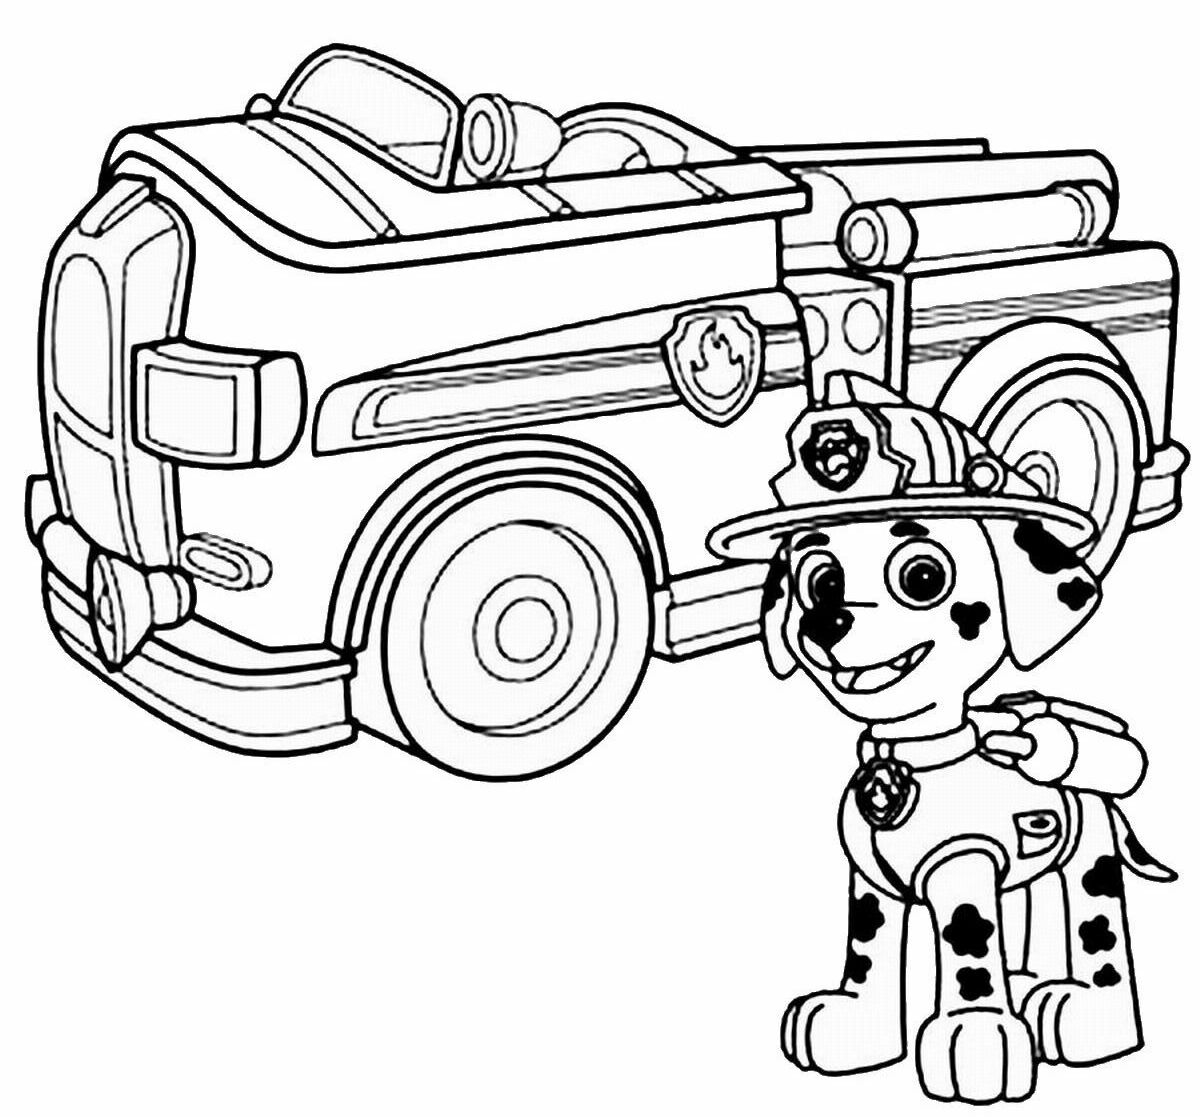 Marshal and his fire truck - Paw Patrol Coloring Page